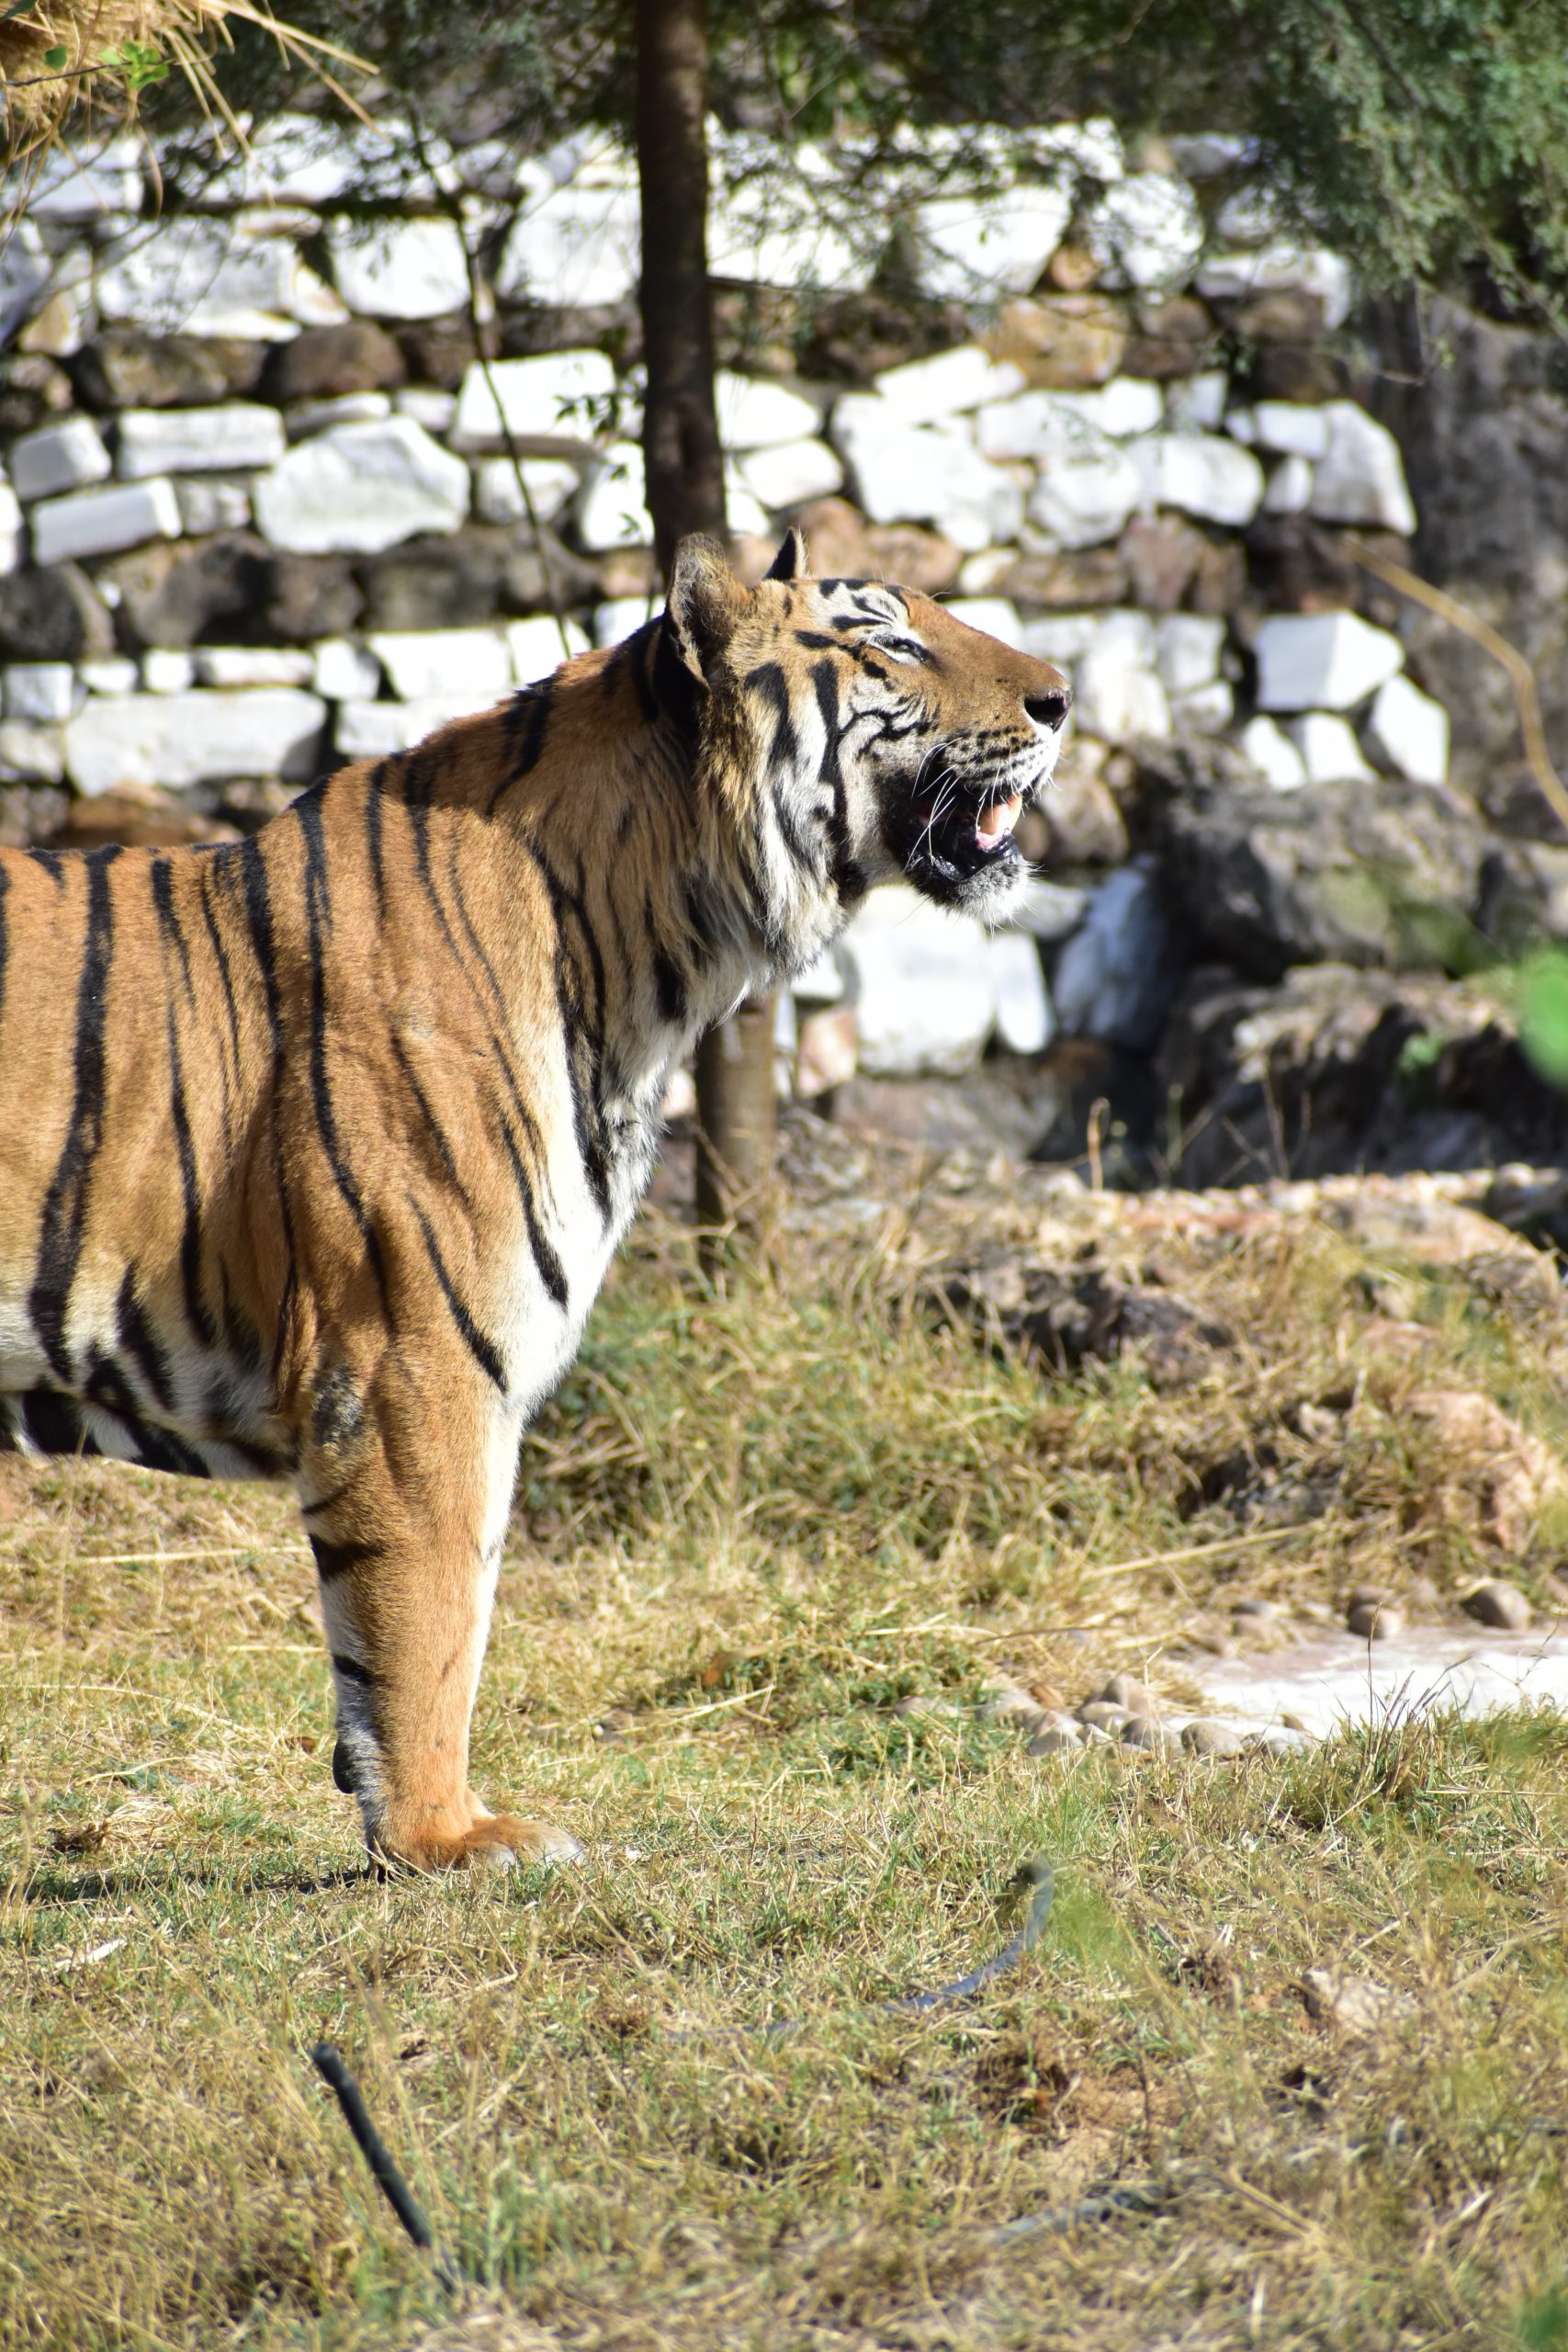 A Bengal tiger in a zoo